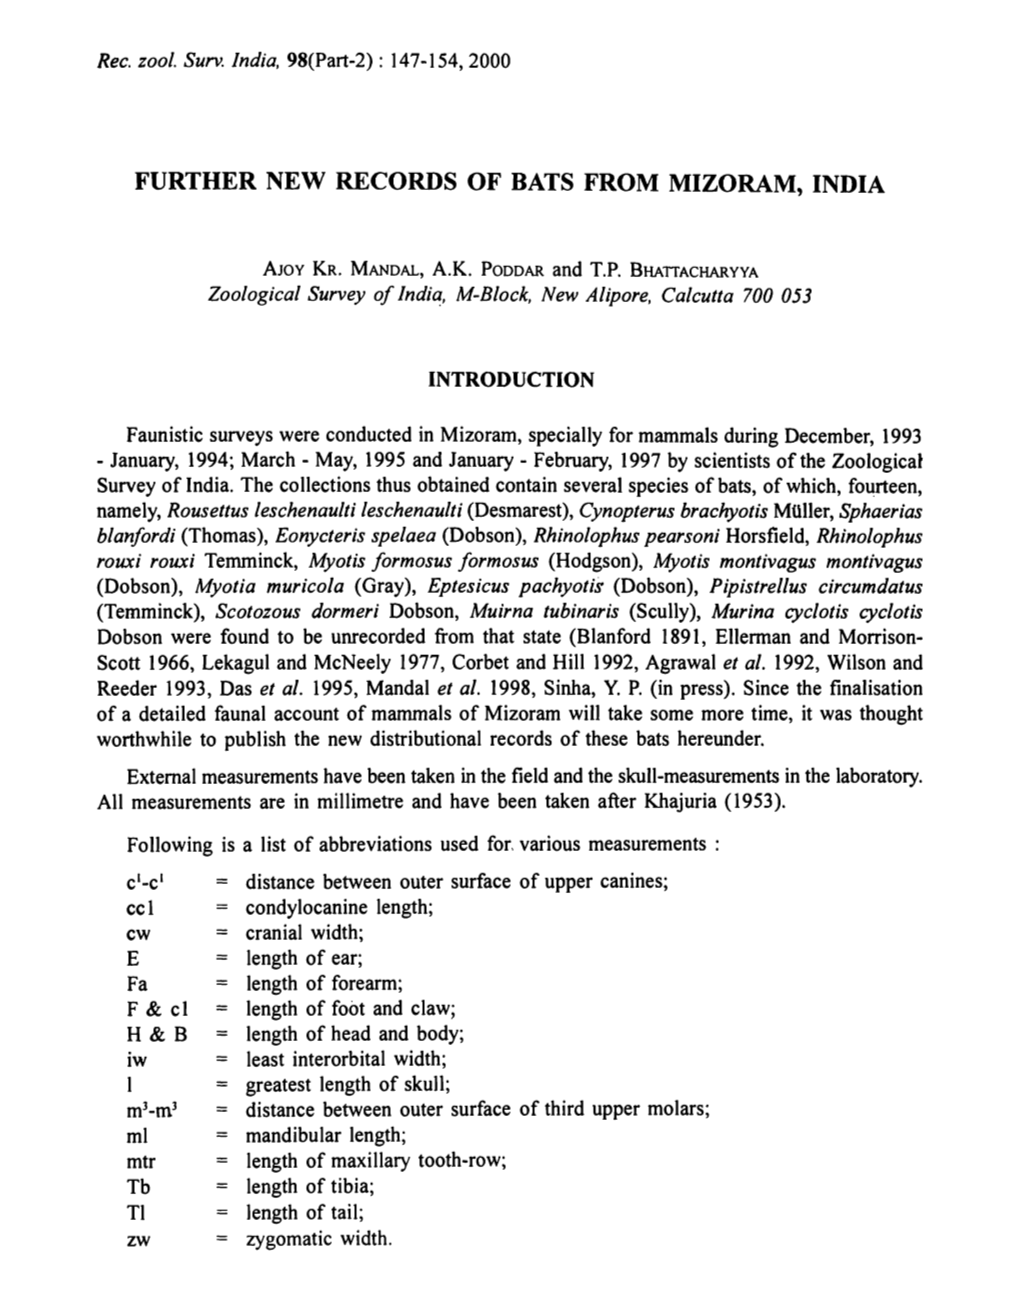 Further New Records of Bats from Mizoram, India